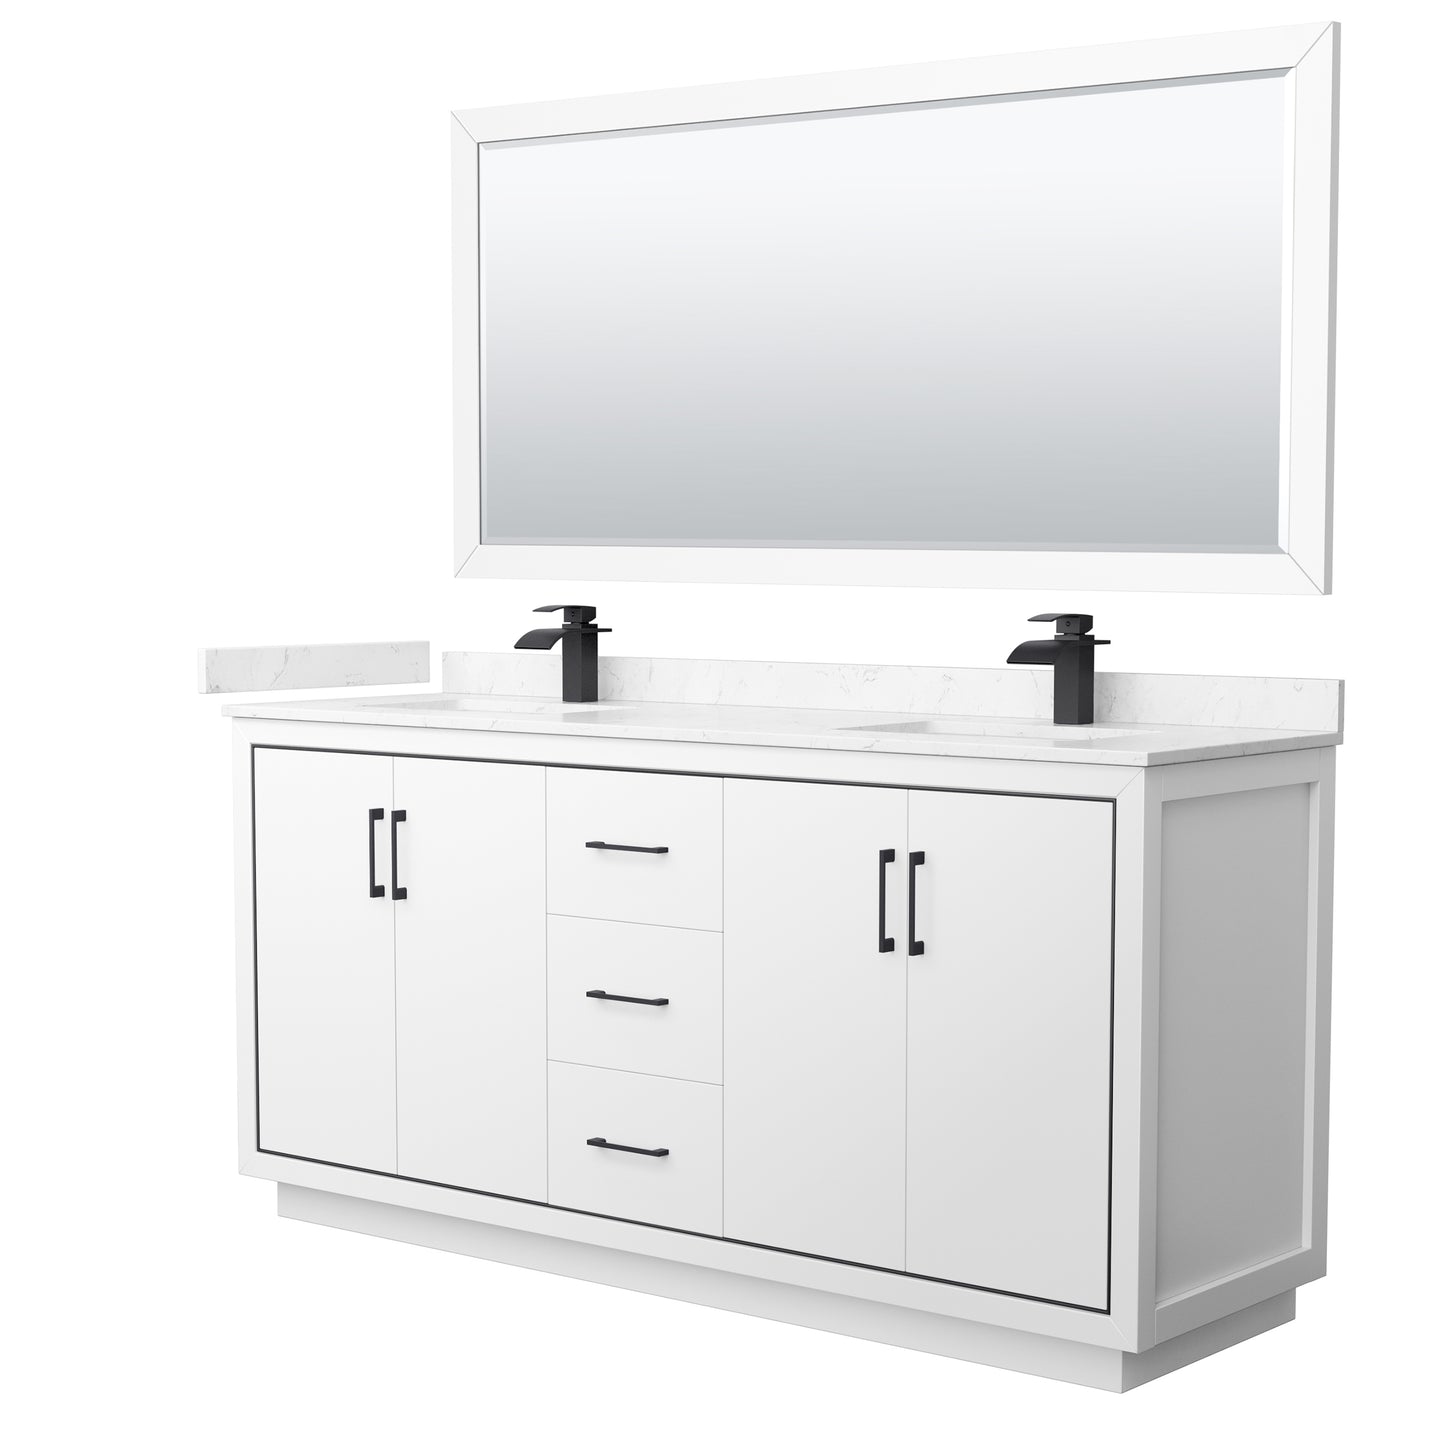 Wyndham Icon 72 Inch Double Bathroom Vanity Carrara Cultured Marble Countertop with Undermount Square Sinks, Matte Black Trim and 70 Inch Mirror - Luxe Bathroom Vanities